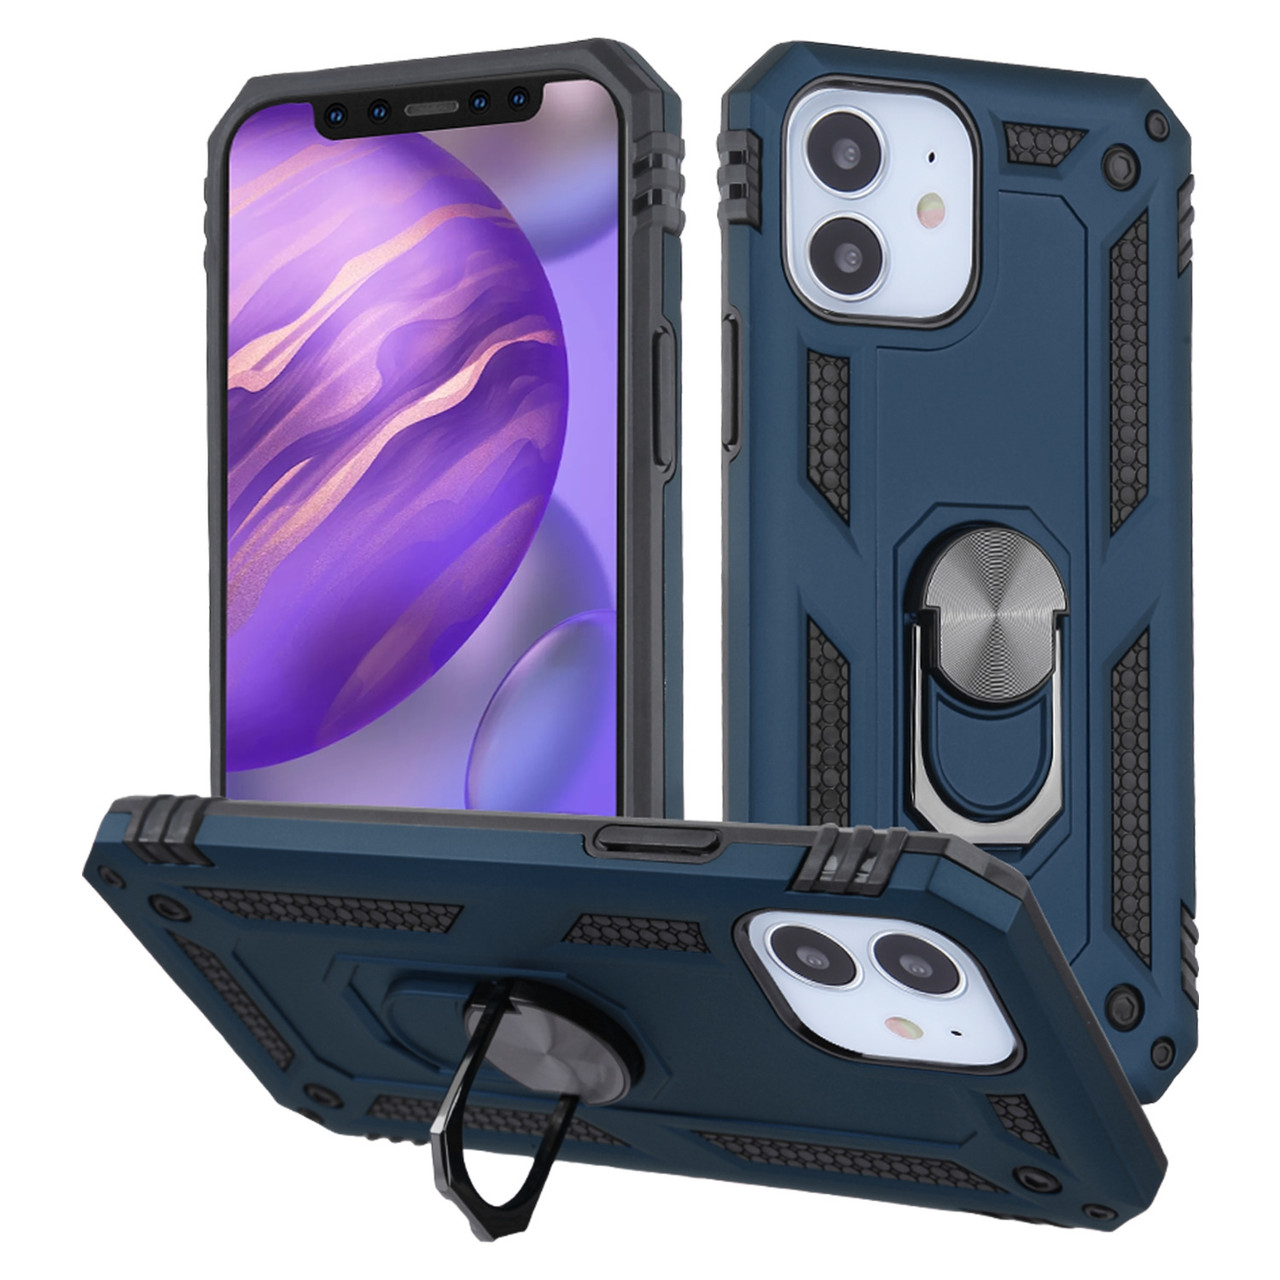 Finger Loop Armor Hybrid Case With 360 Rotating Ring Holder Kickstand For Iphone 12 Mini Navy Blue Hd Accessory